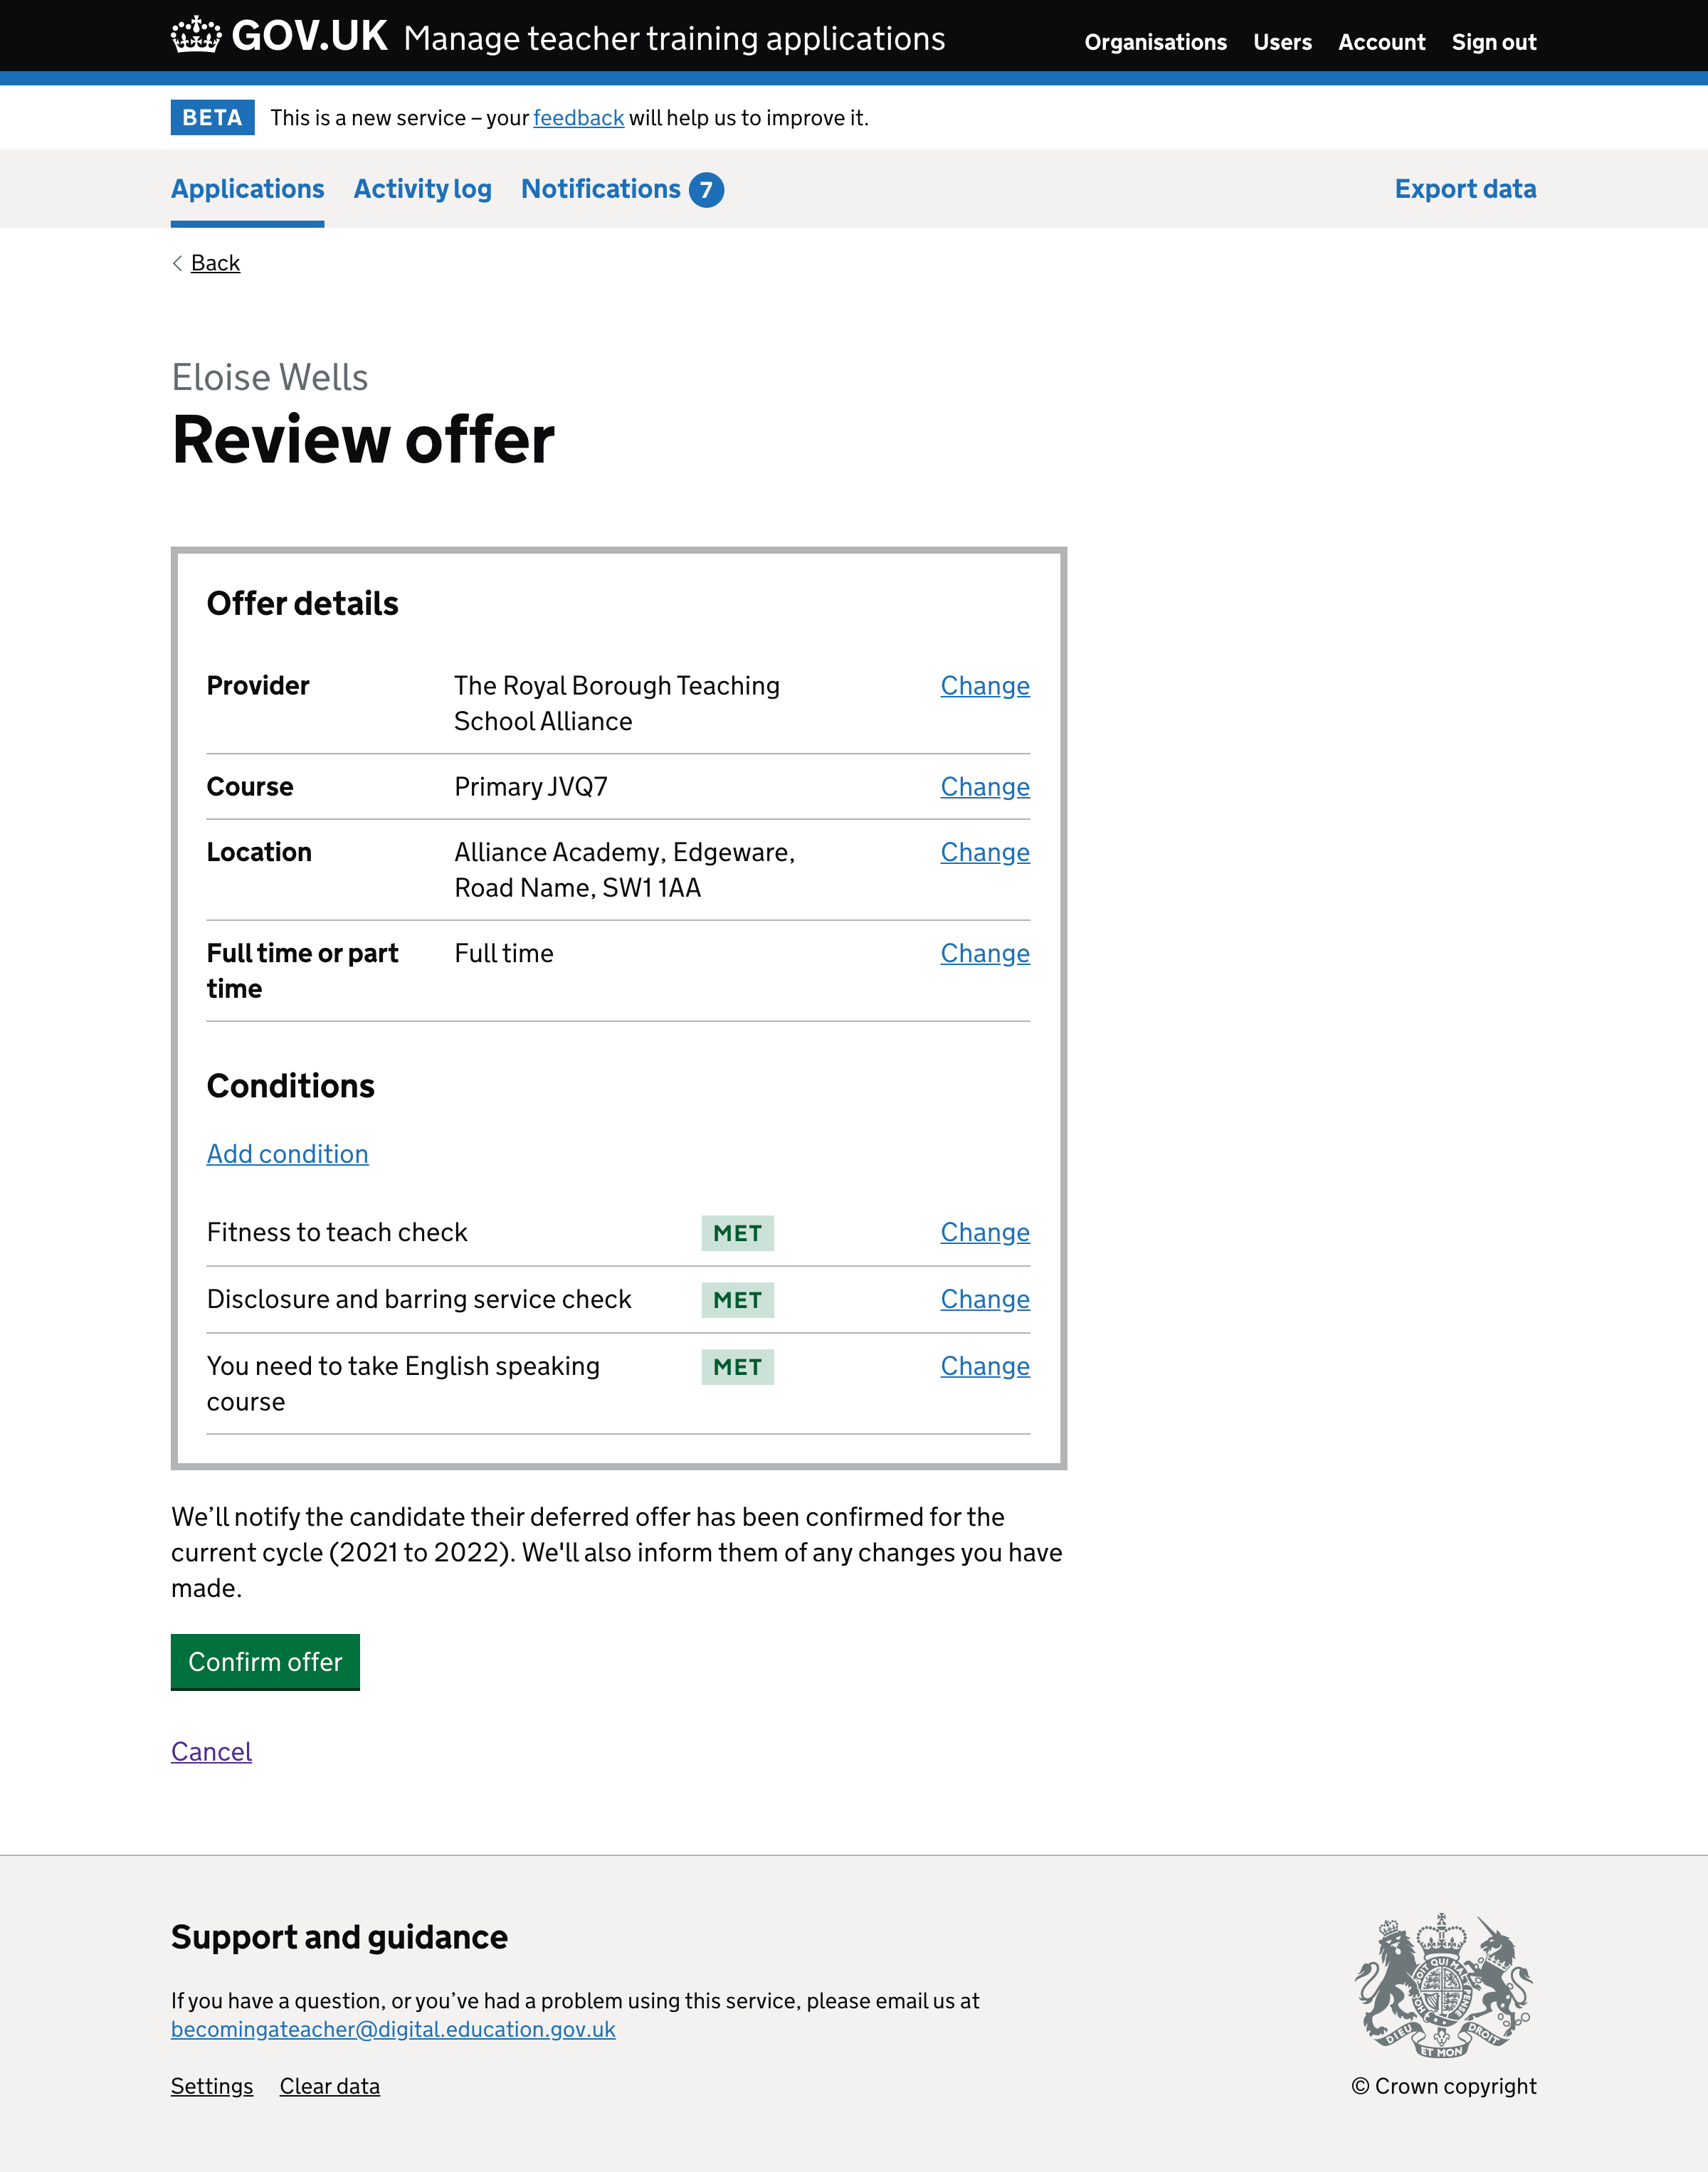 Screenshot of ‘Review offer’ page.